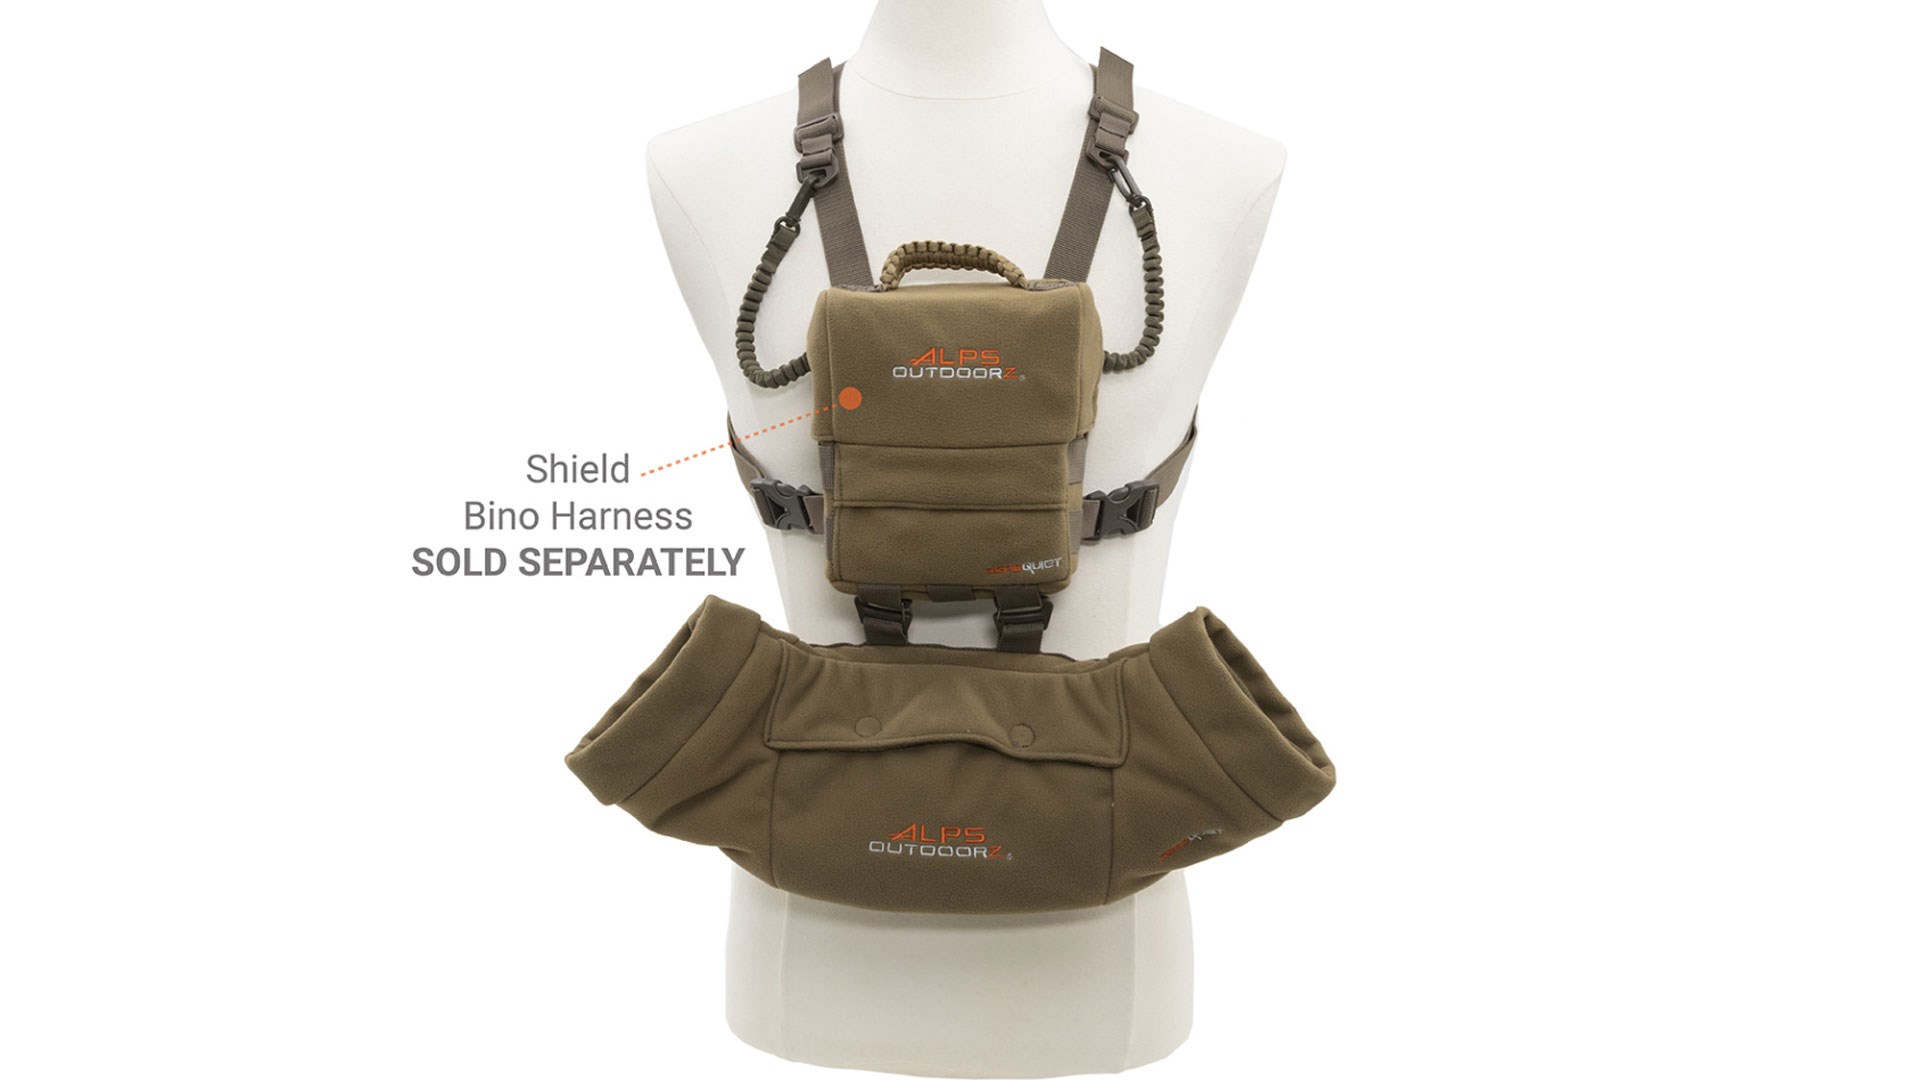 Ember attached to Shield Bino harness